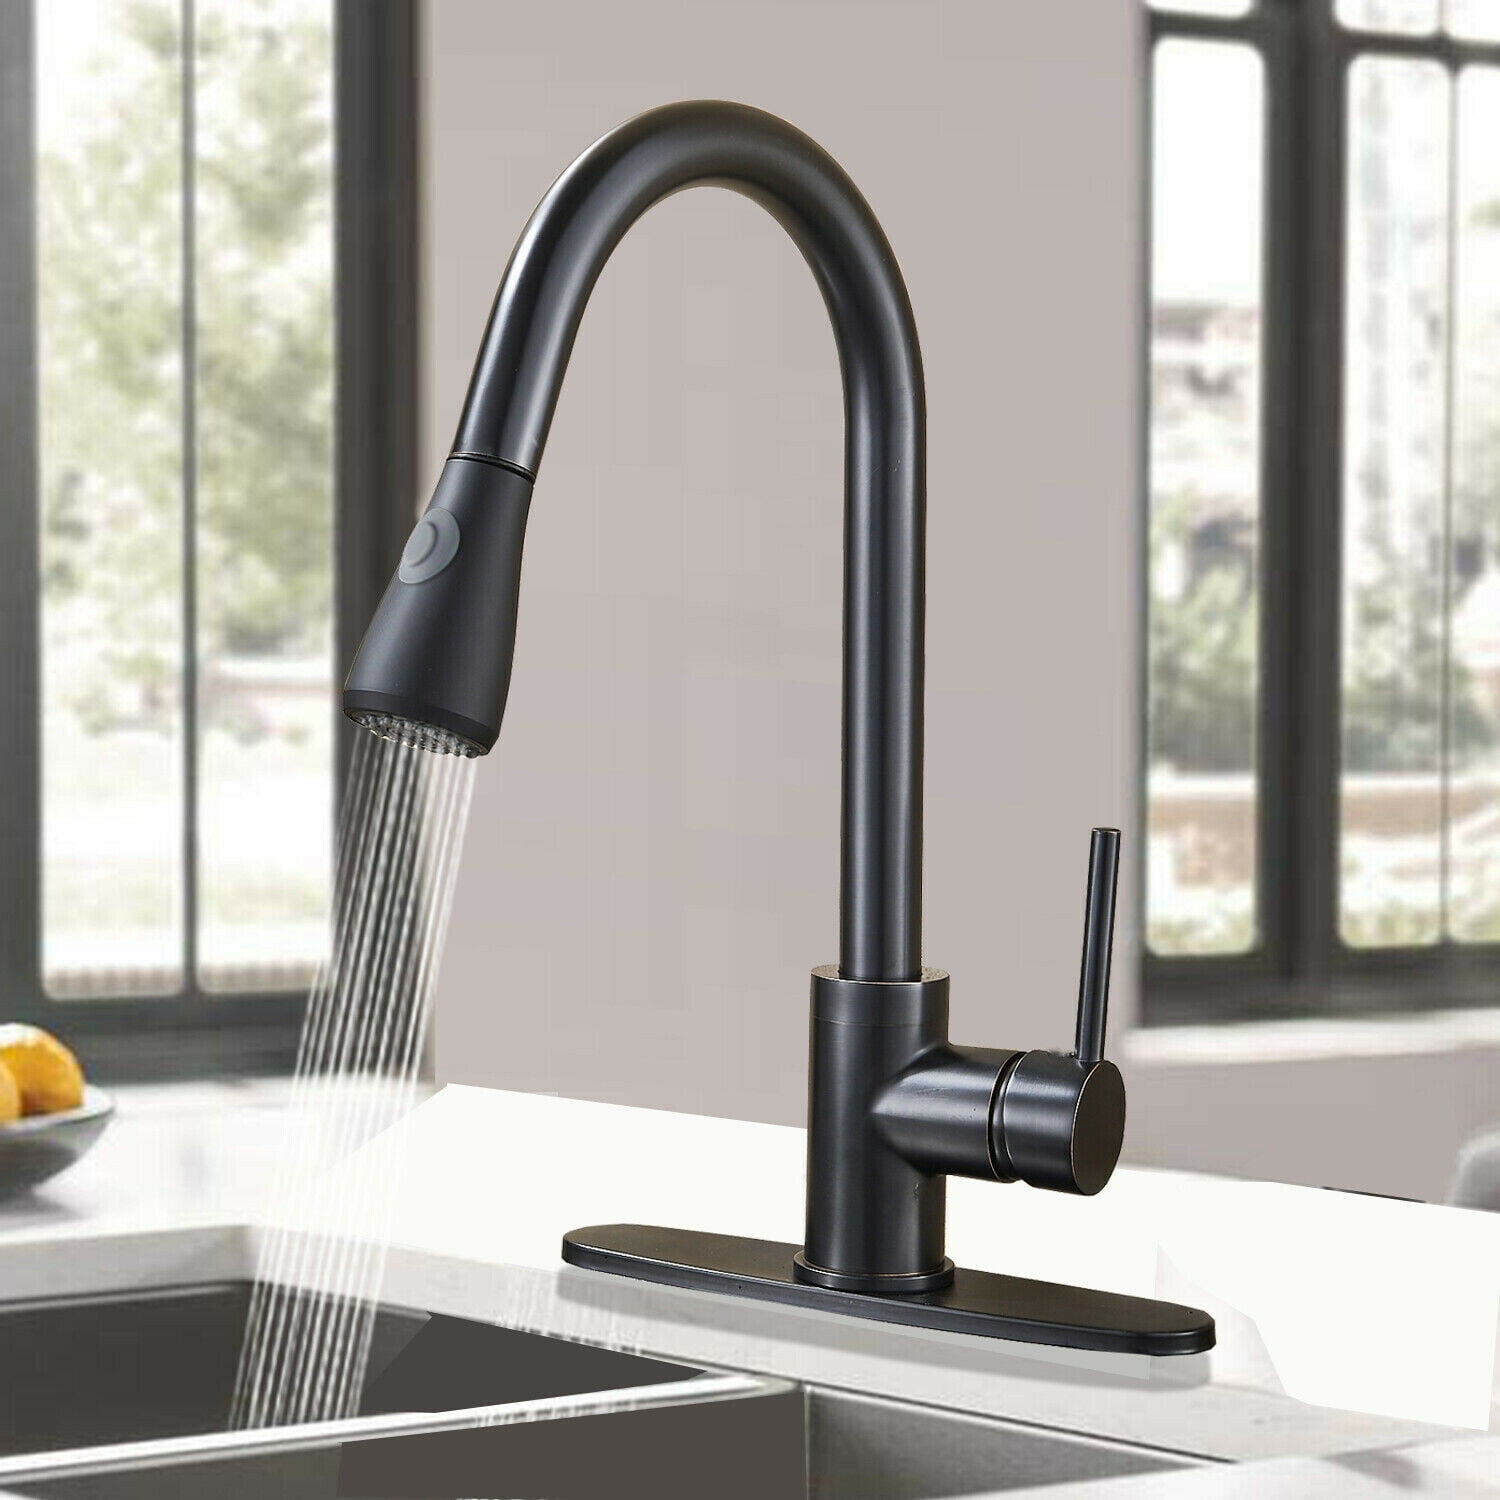 Single Handle Brushed Kitchen Faucet Sink Pull Out Sprayer Mixer Tap With Cover 